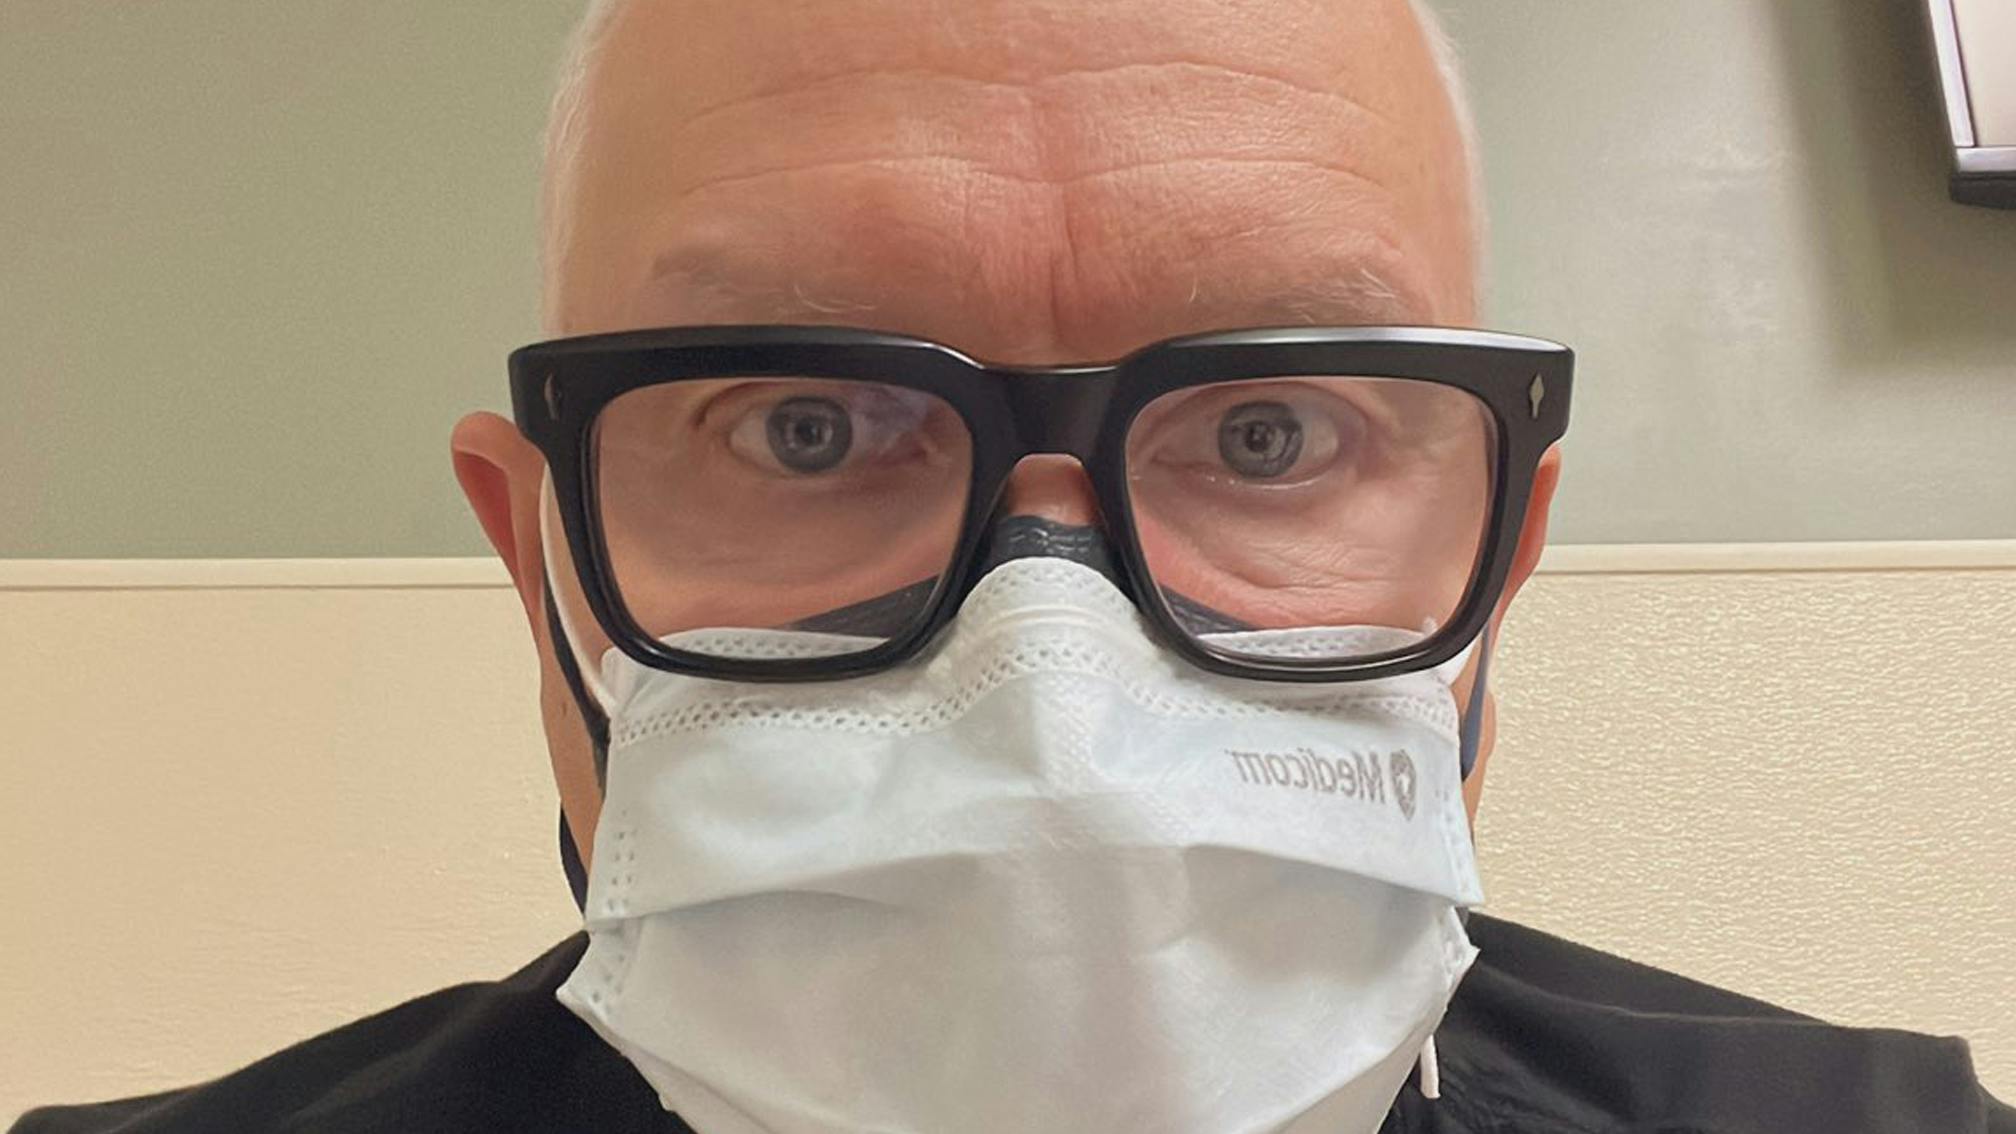 blink-182's Mark Hoppus has surgery to remove chemotherapy port